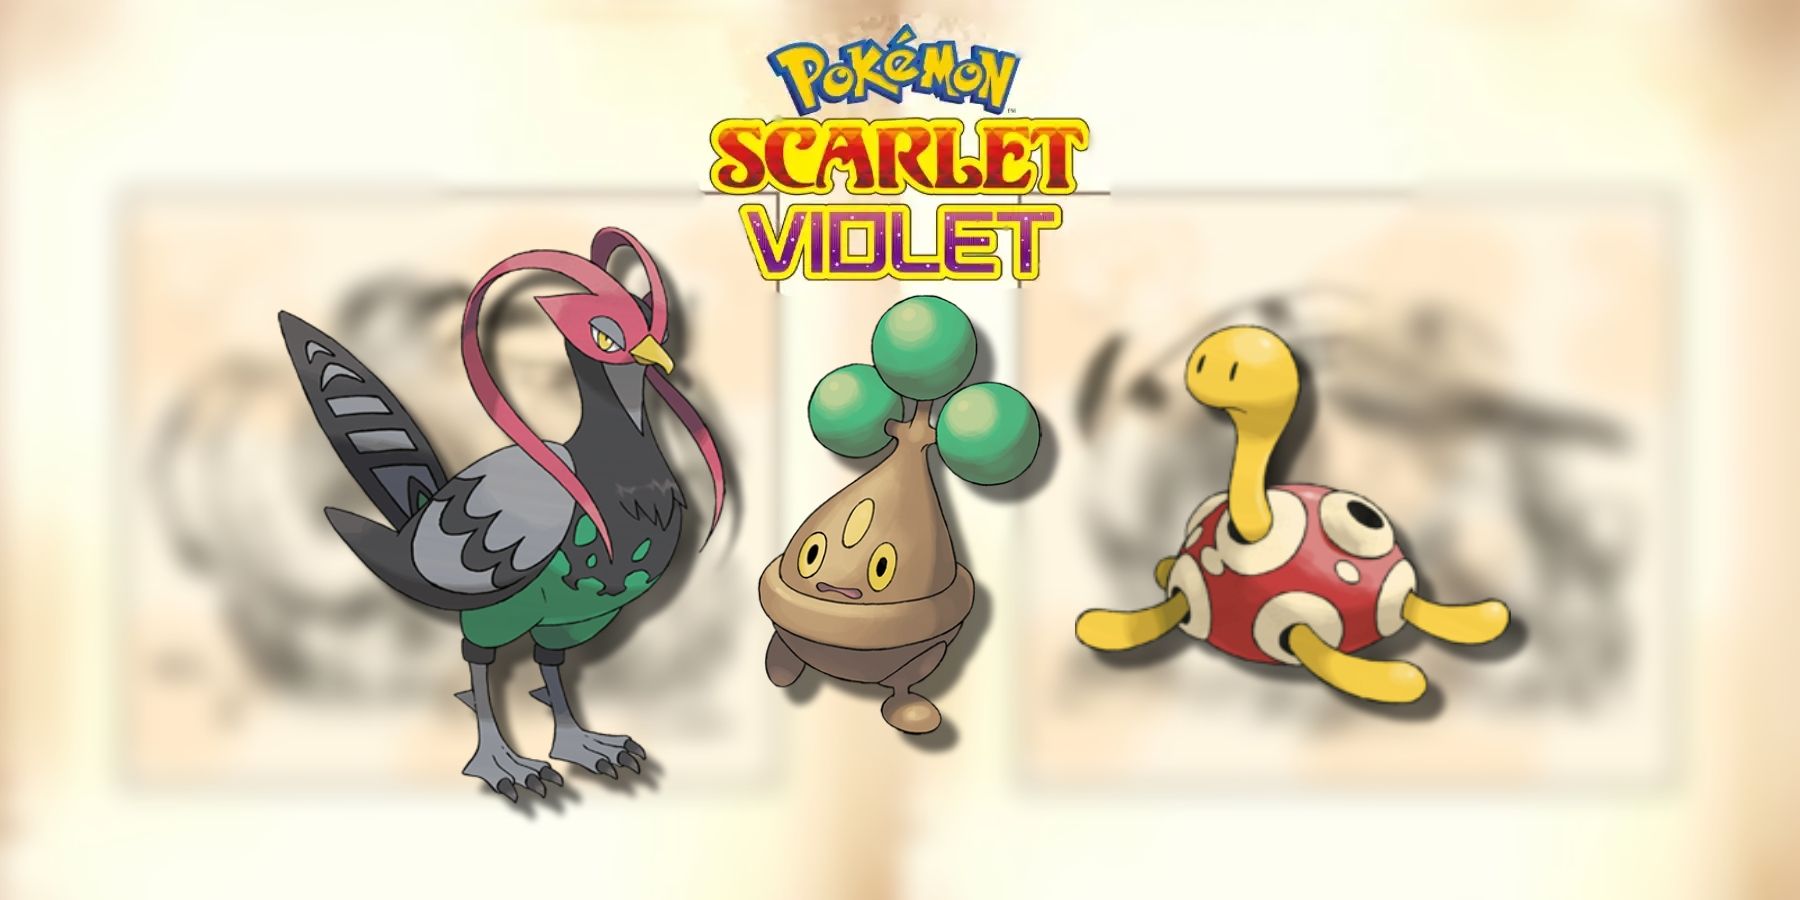 Who's your favourite Paradox Pokémon in Scarlet and Violet? ❄️I